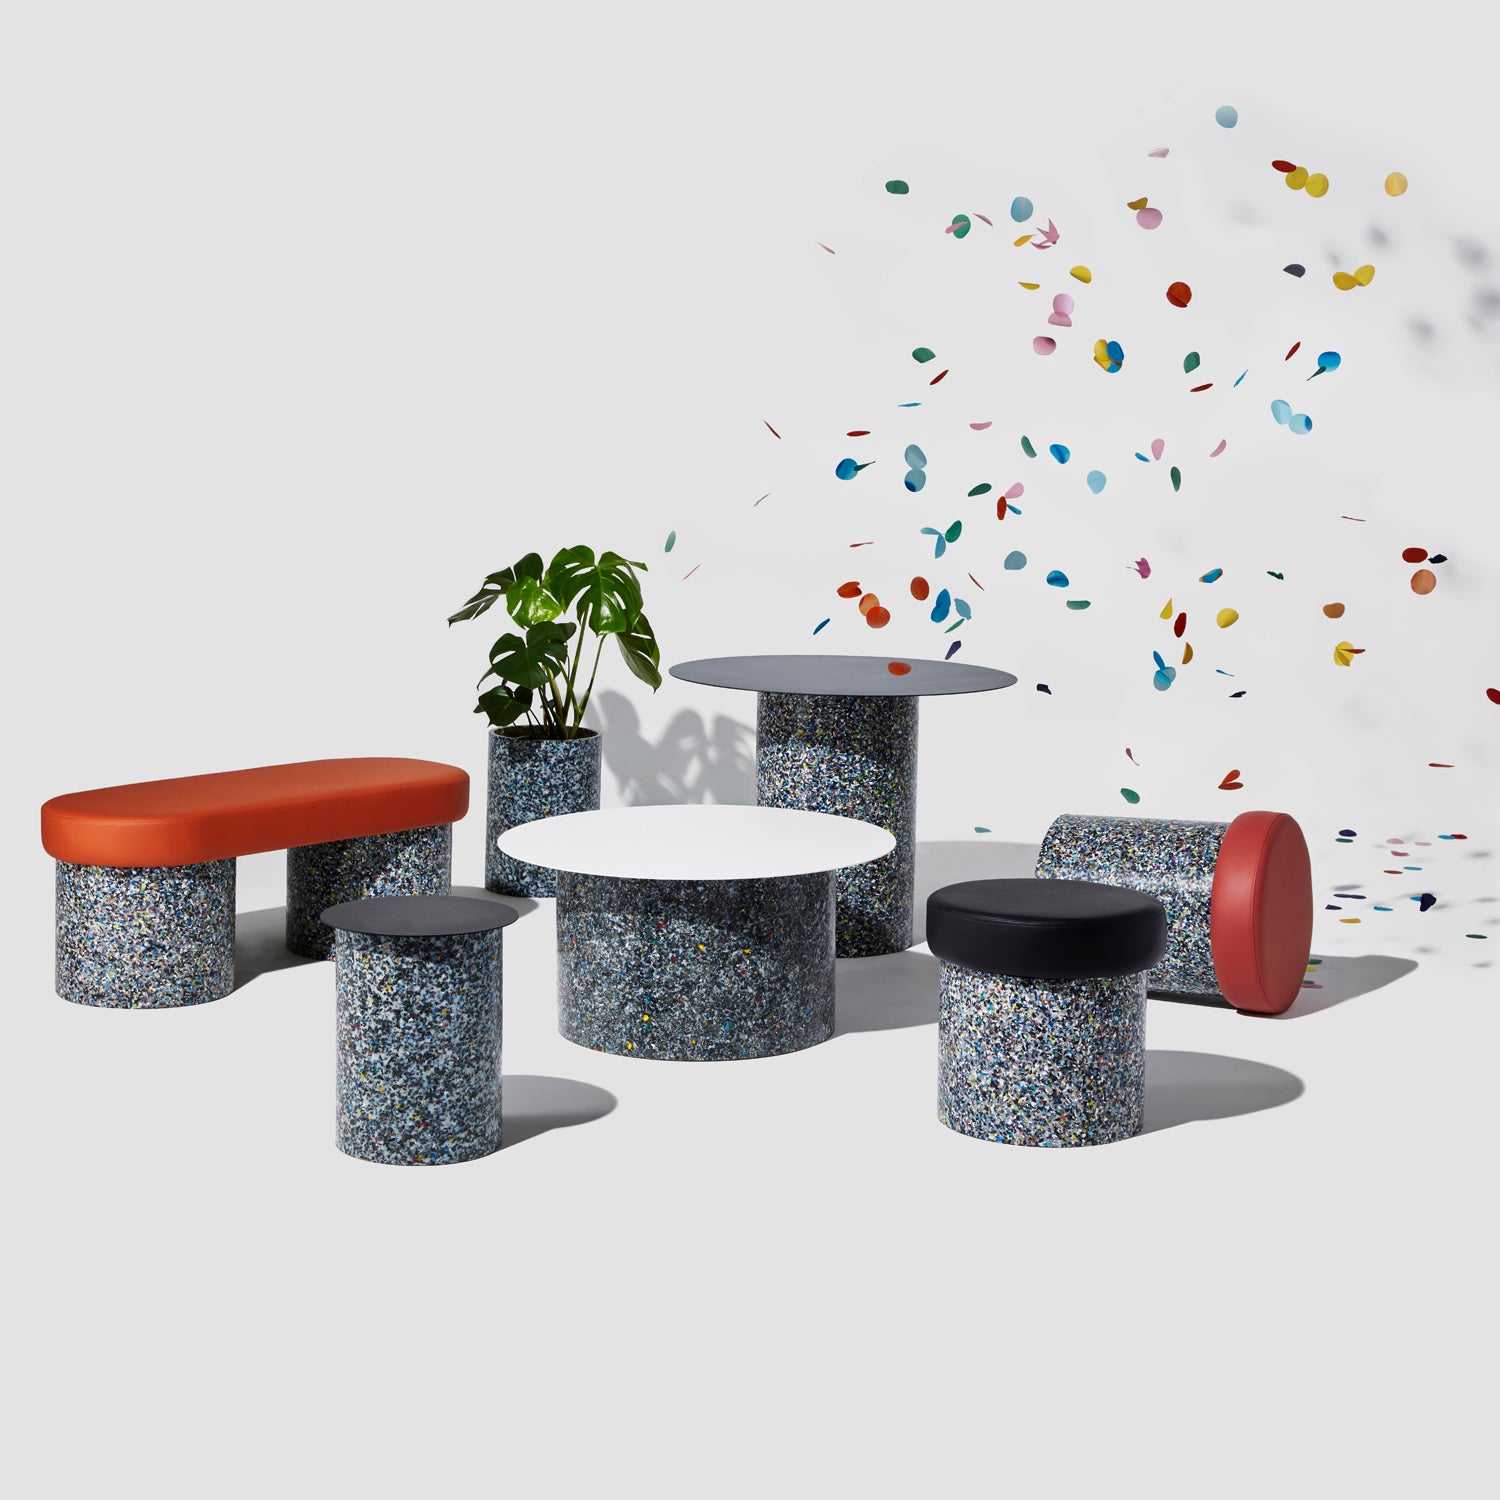 Confetti Side Table | 100% Recycled Plastic Indoor/Outdoor Furniture | DesignByThem | GibsonKarlo